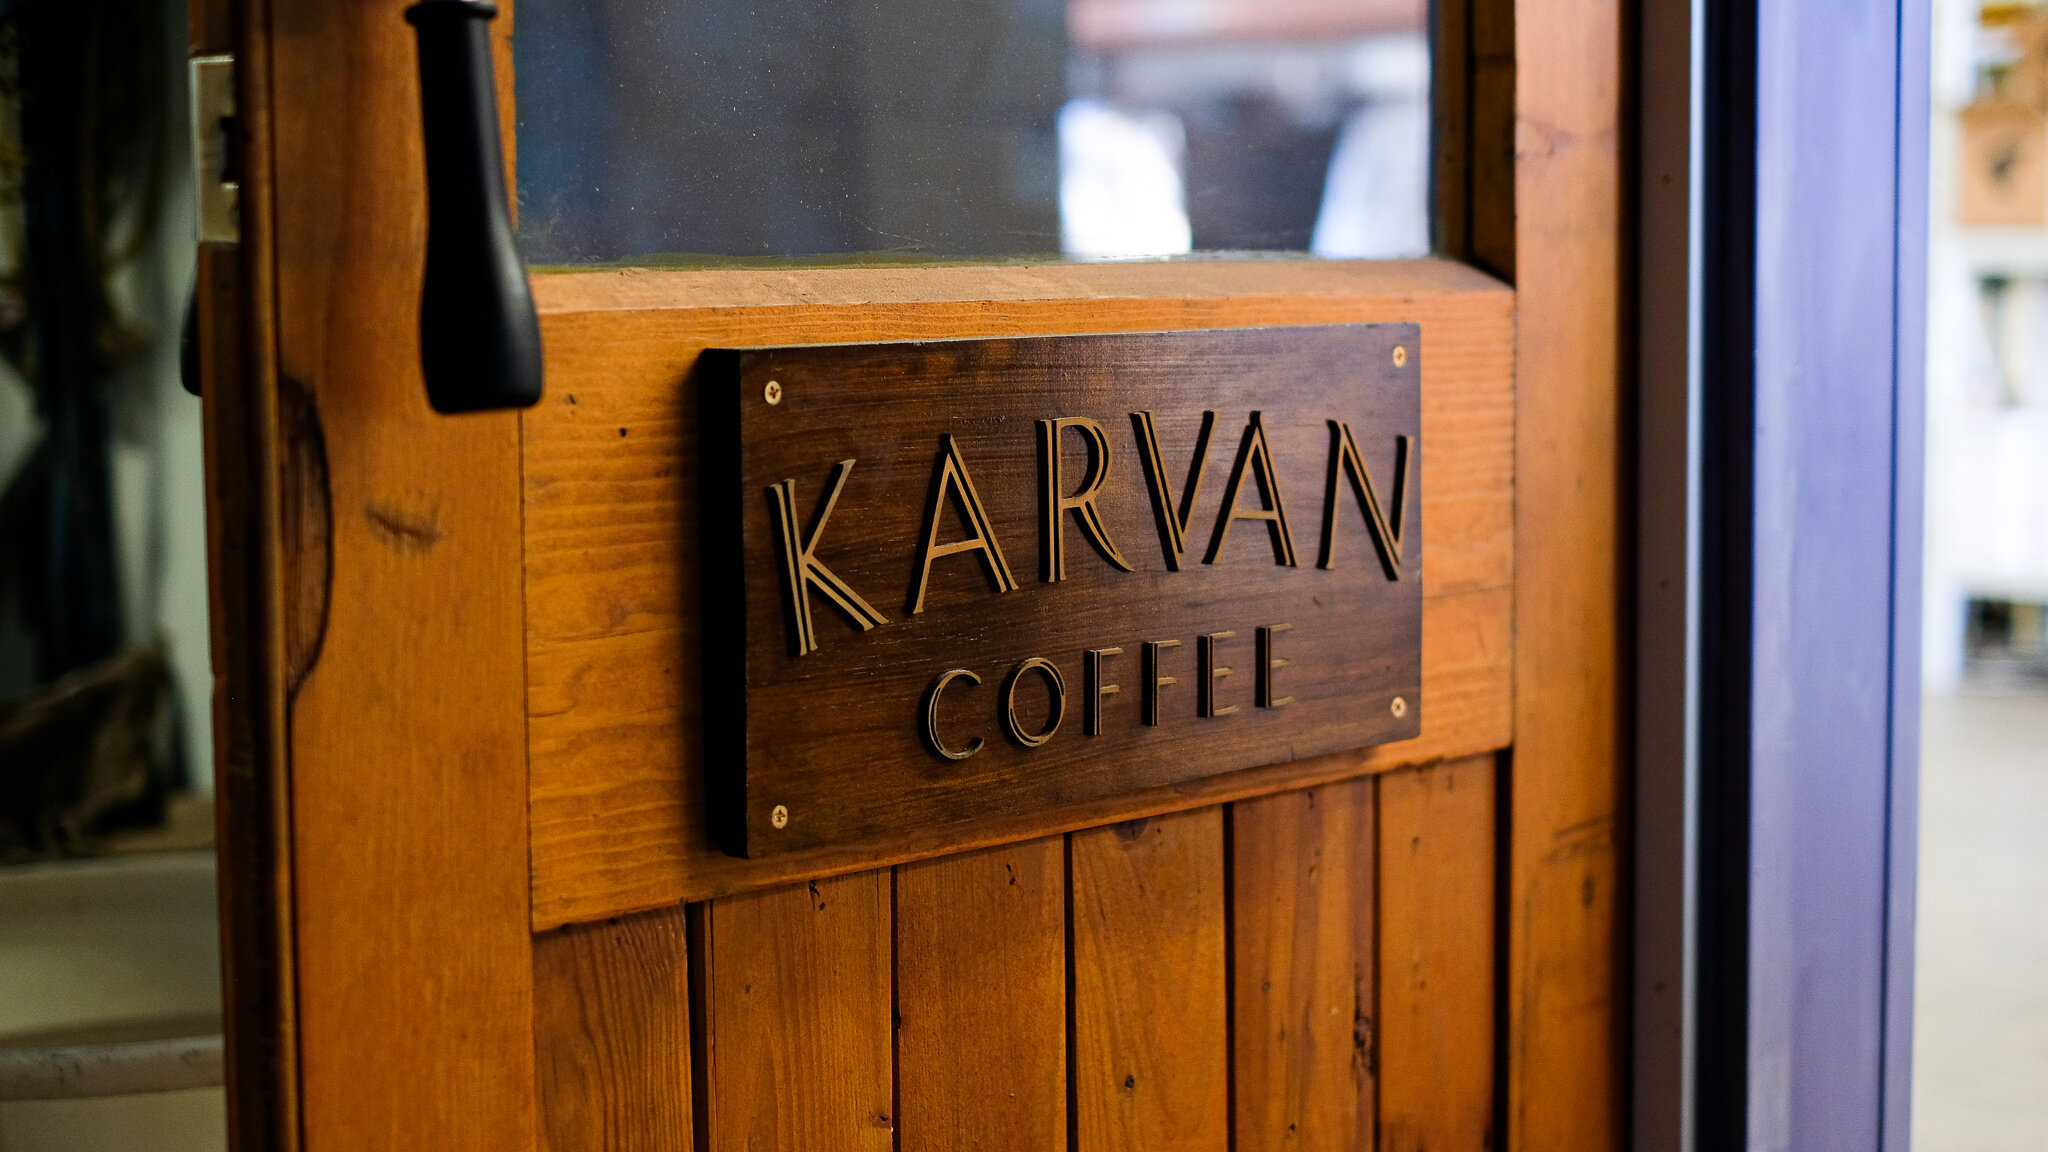 When you have a cup of Karvan you can understand what all of the fuss is about – delicious (check), affordable (check), and crafted by a wholesome, friendly and passionate team (check).